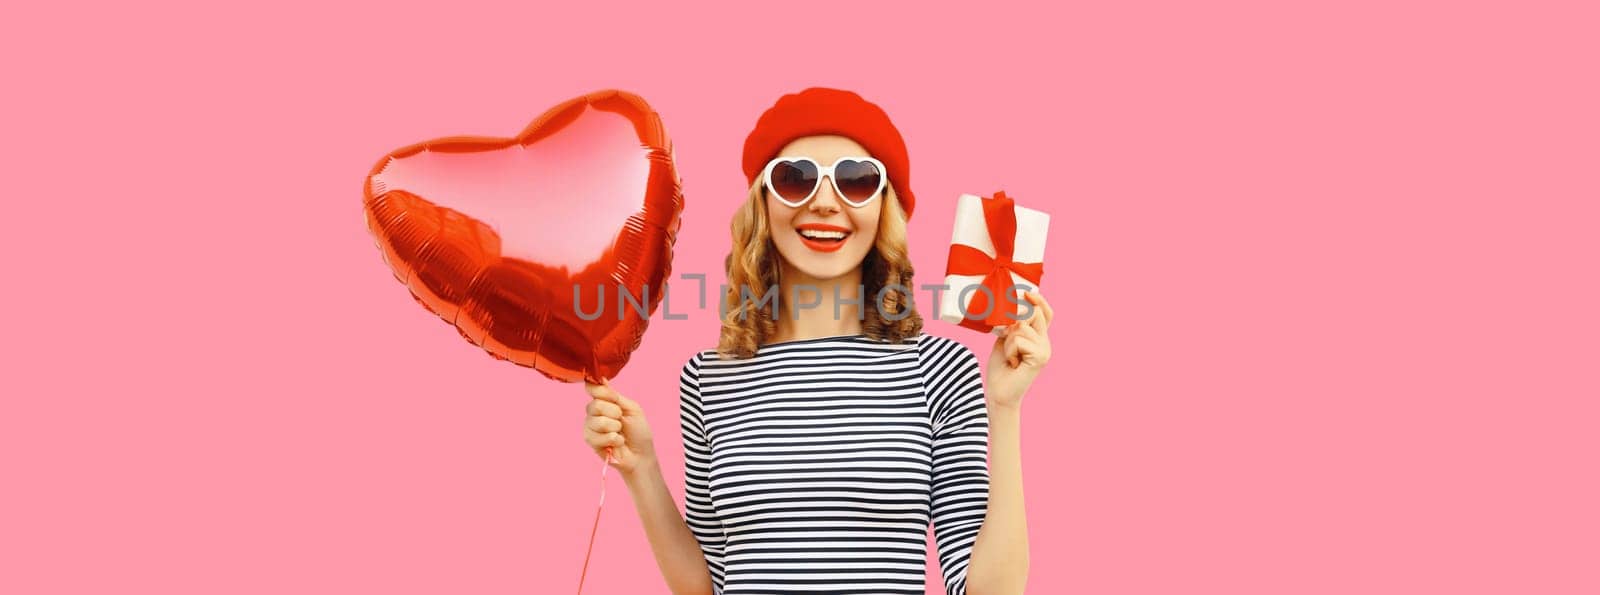 Cute portrait of happy smiling young woman with red heart shaped balloon and gift box wearing french beret hat on pink studio background